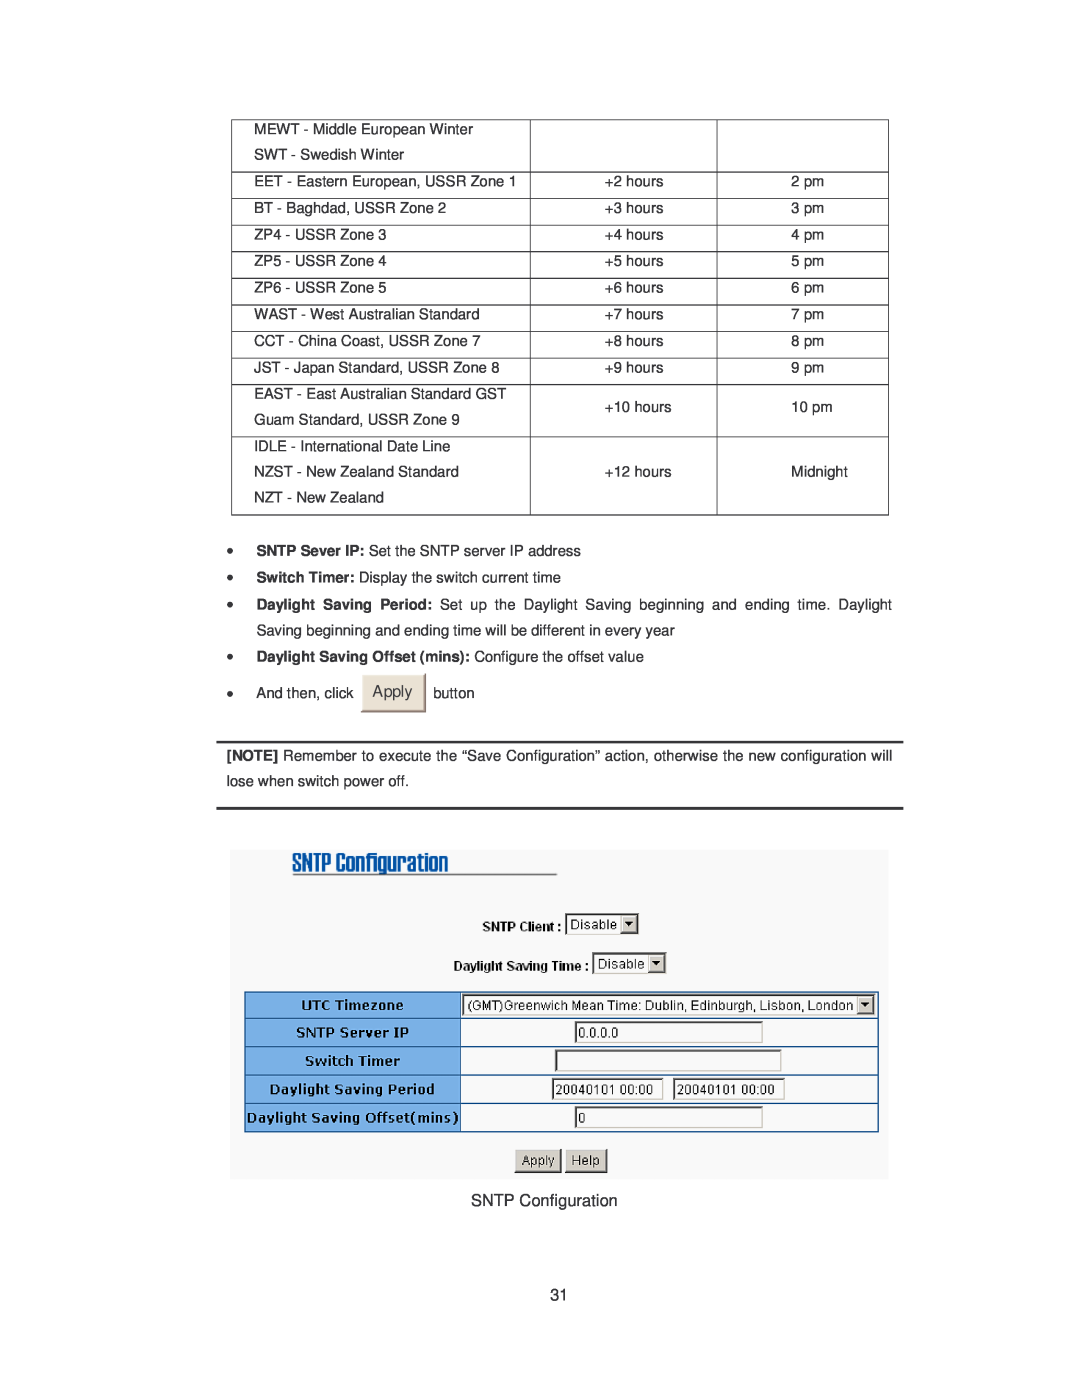 Transition Networks SISTM10XX-162-LR installation manual SNTP Configuration, Apply 